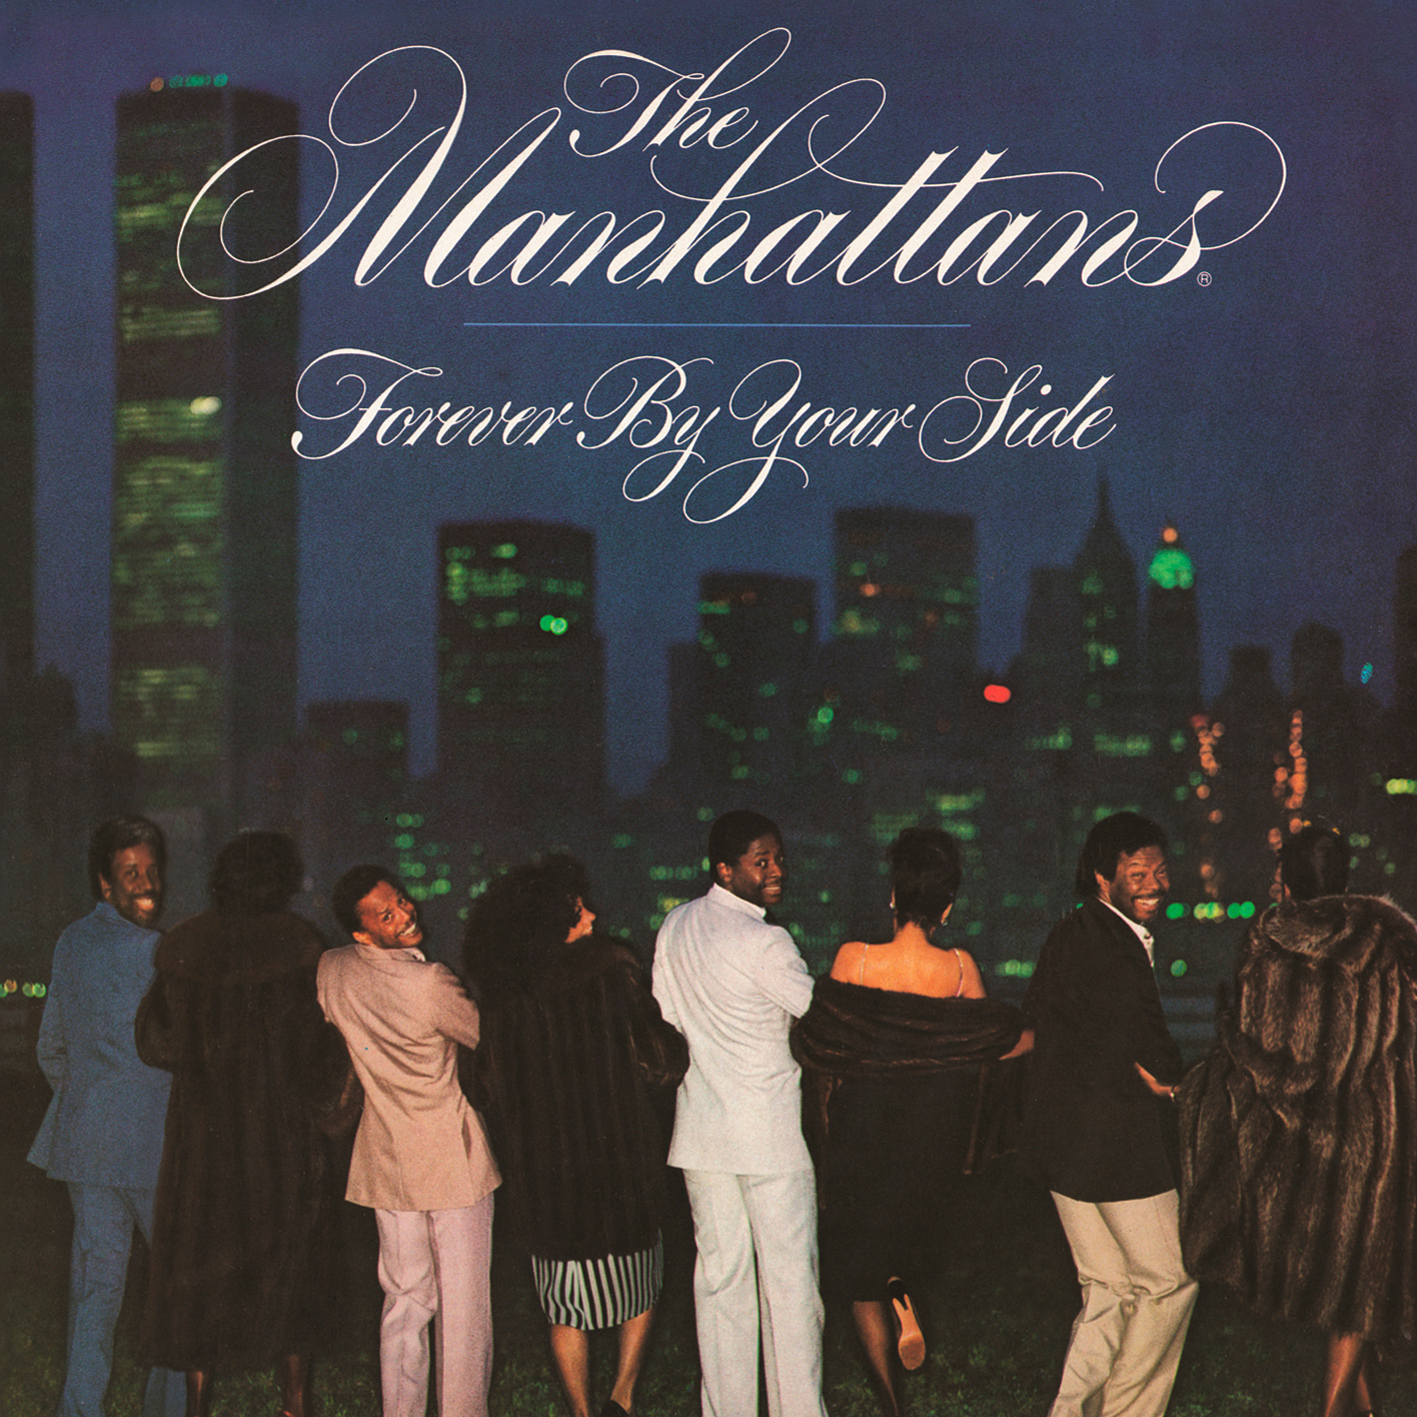 The Manhattans - Forever By Your Side {Expanded Version} (1983/2014/2016) [HDTracks FLAC 24bit/96kHz]